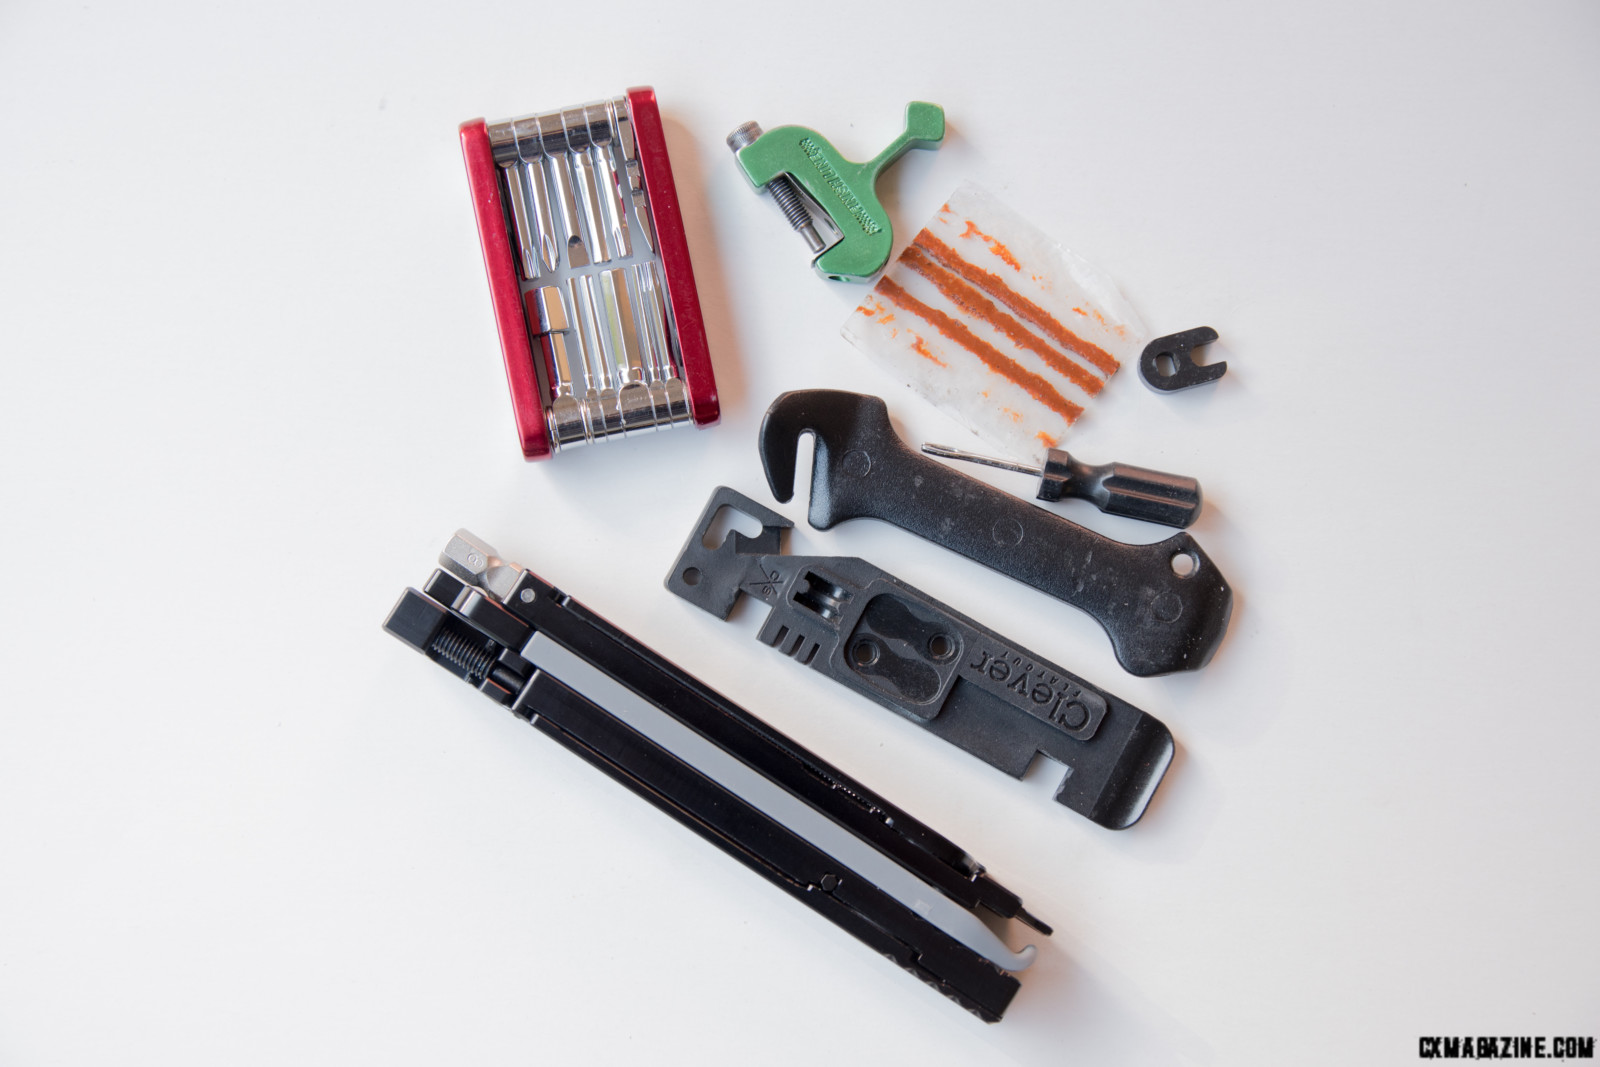 The 8-Bit Tool System is compact and substitutes for everything shown here, plus has a knife